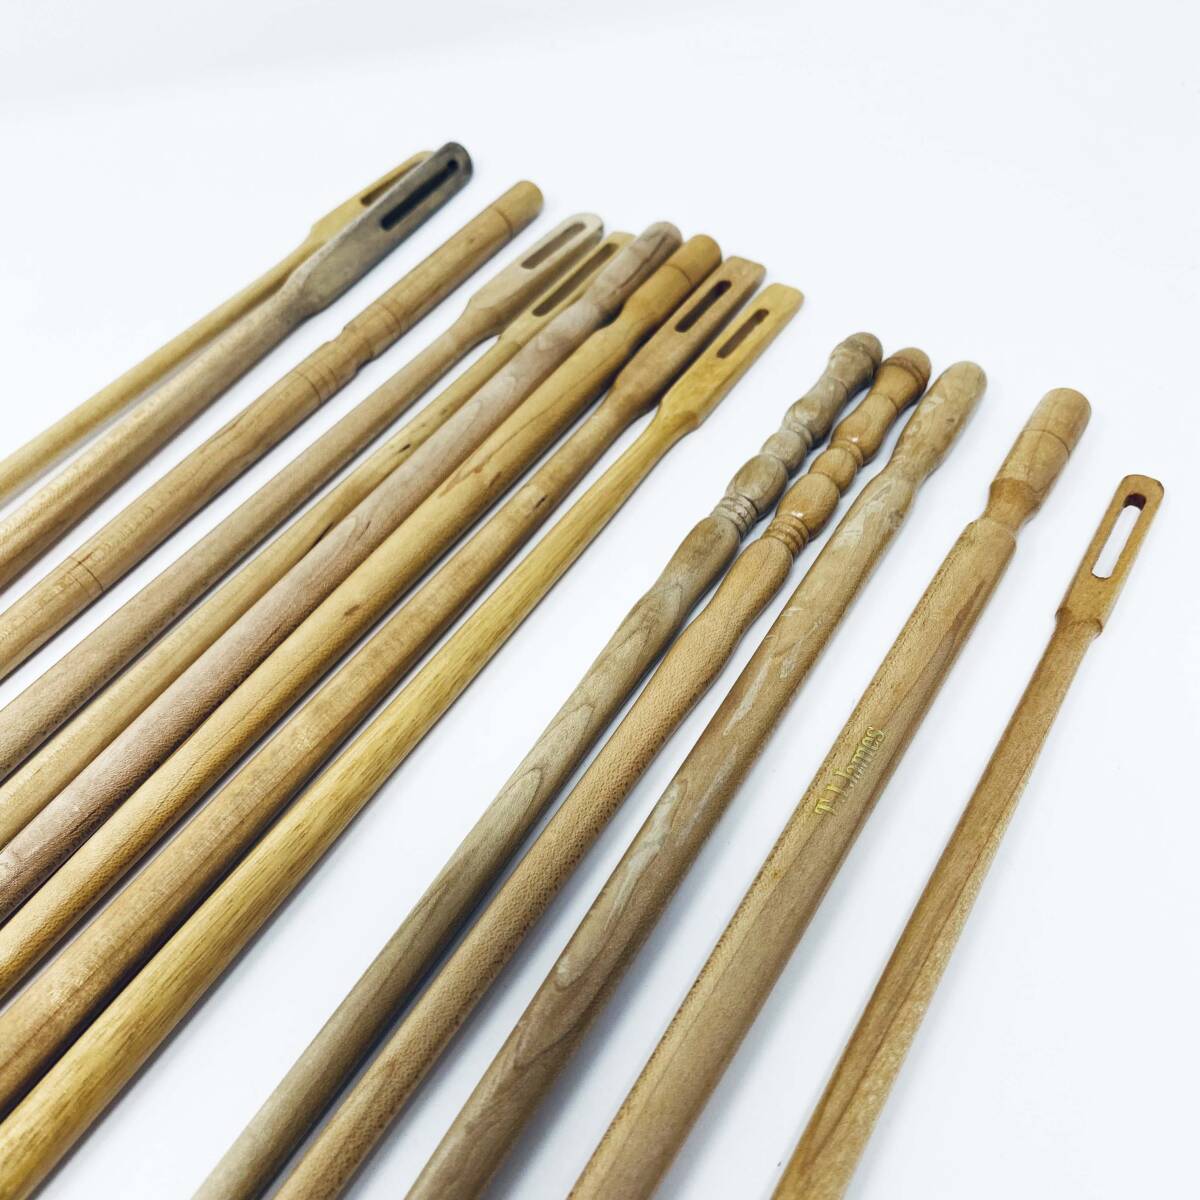 5) prompt decision price flute cleaning rod cleaning stick wooden 14 pcs set together 